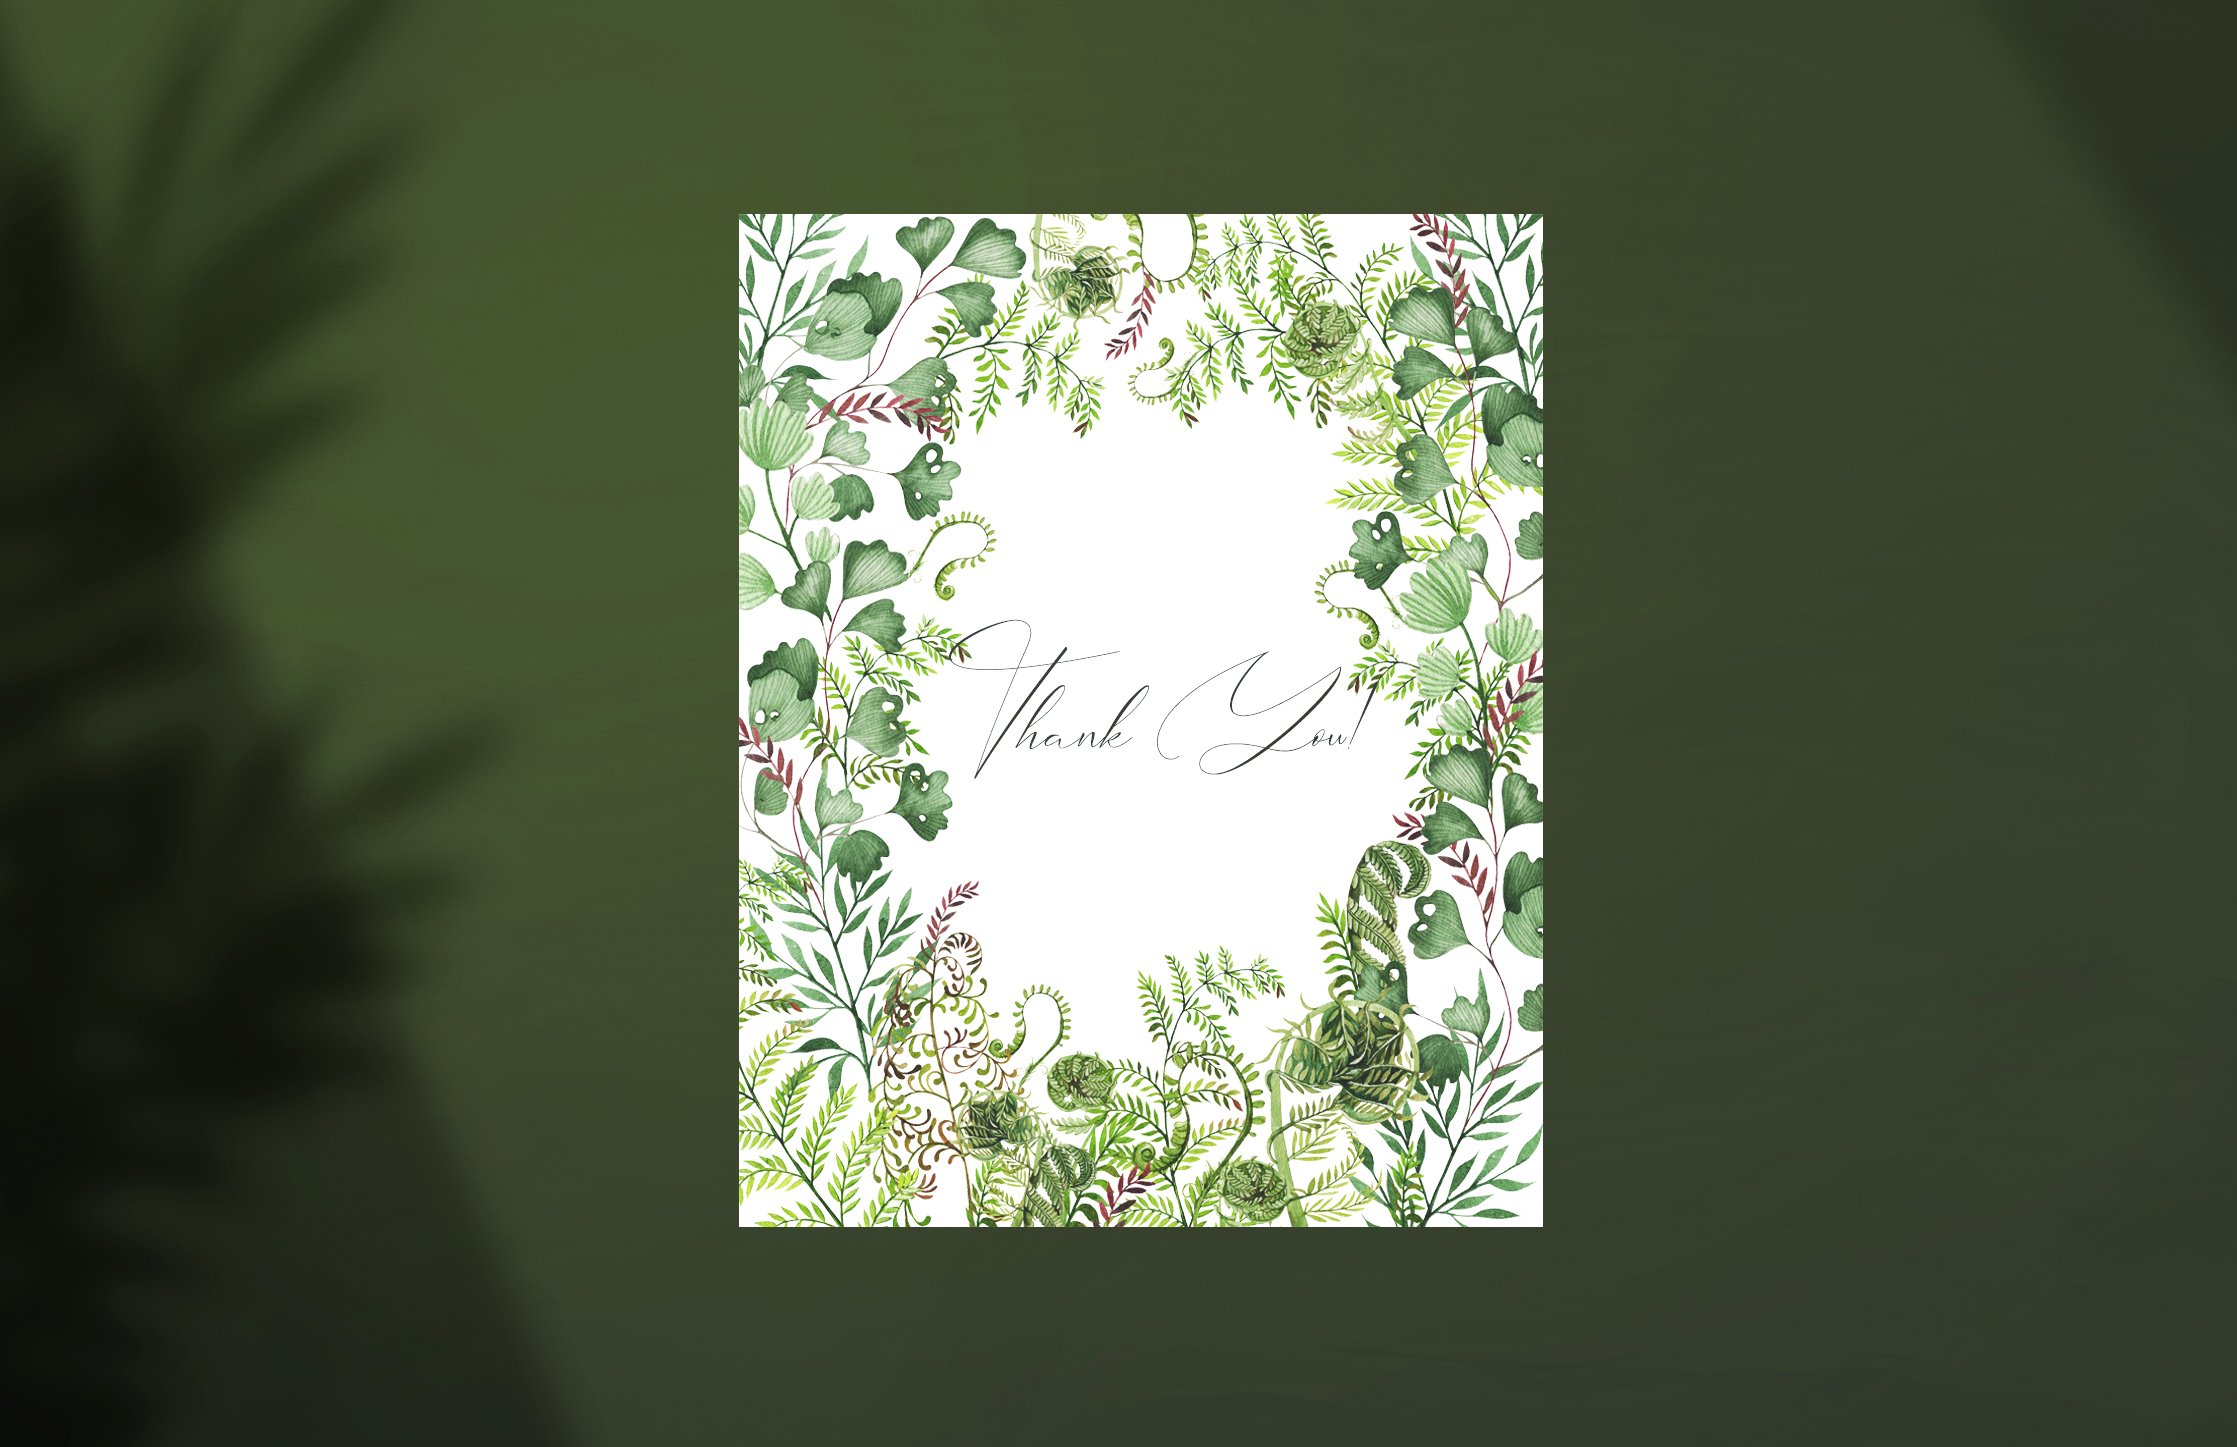 Thank card with watercolor leaves and greenery.